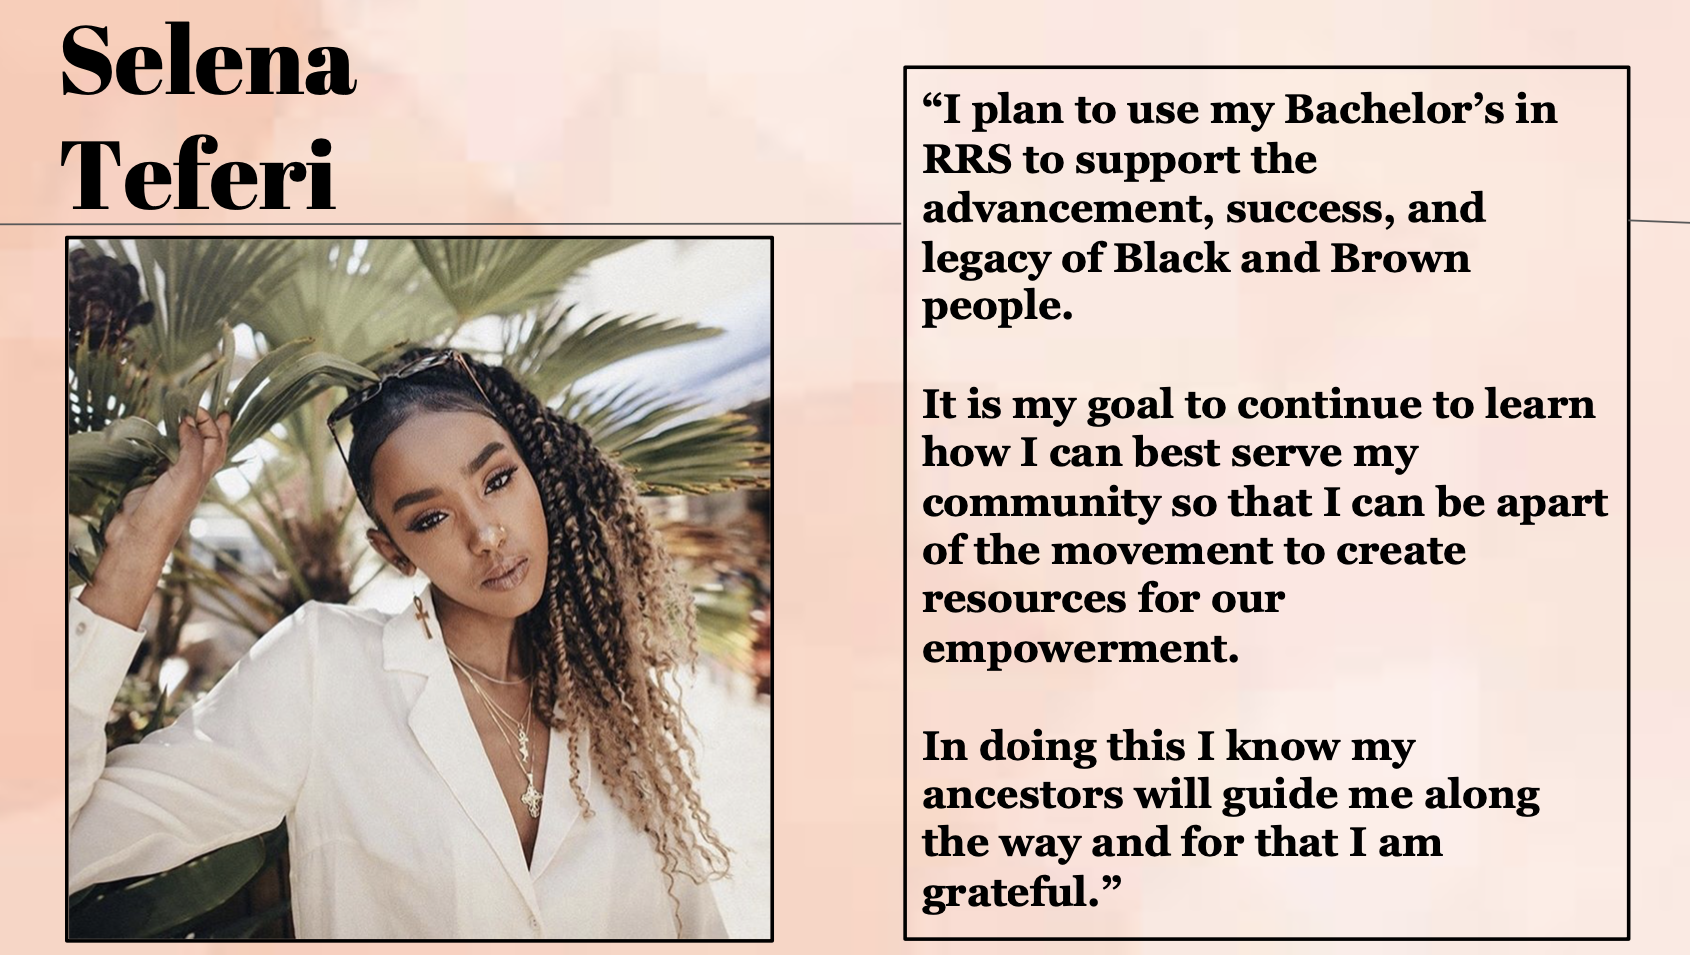 Selena Teferi plans to use her Bachelor's in RRS to support the advancement, success, and legacy of Black and Brown people.